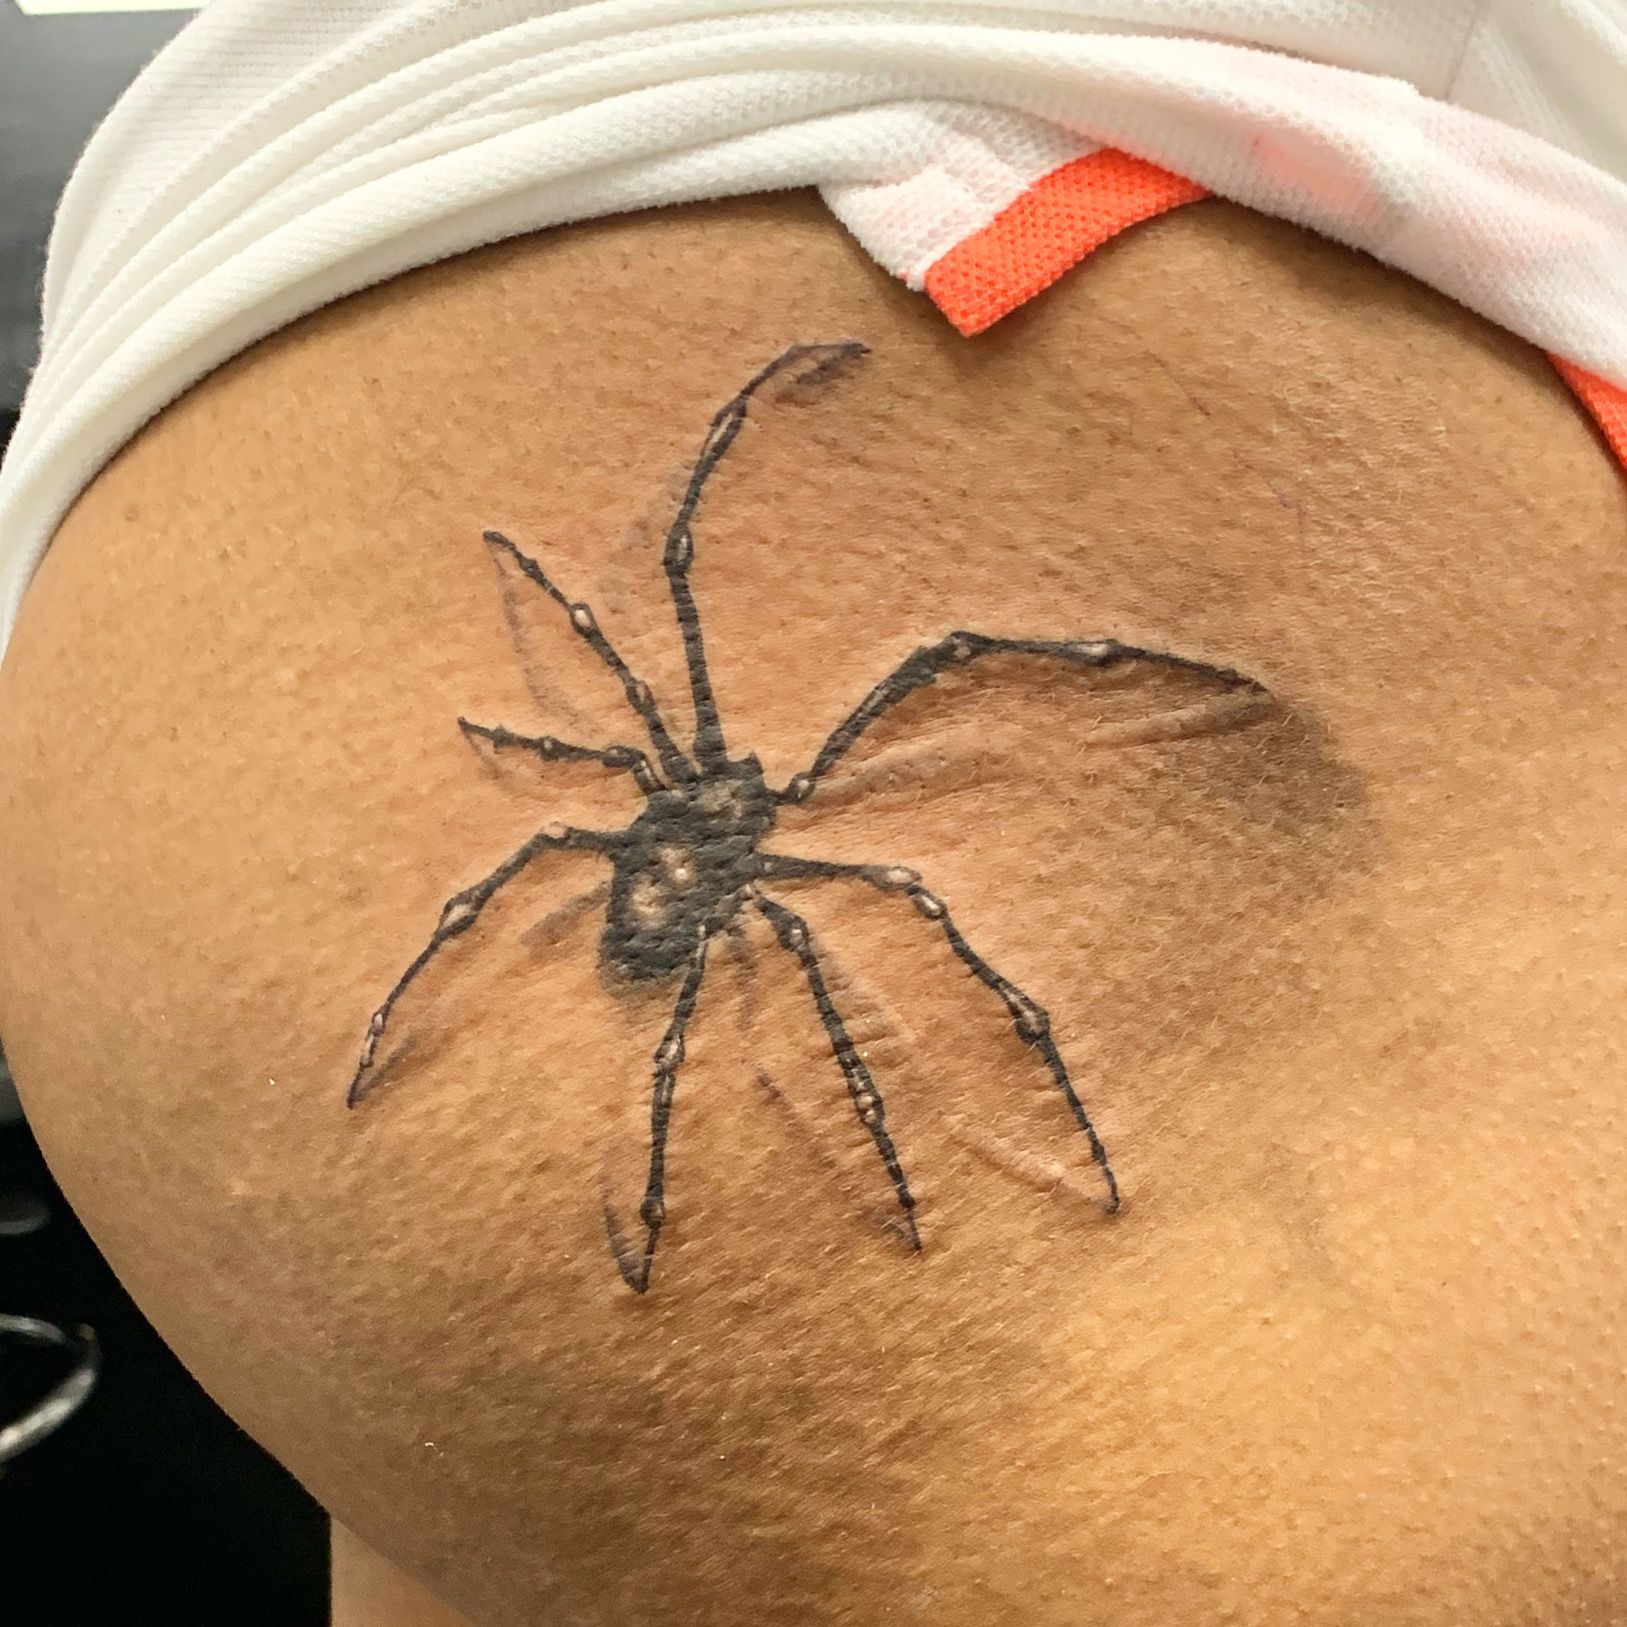 Silhouettes of spiders  Spider tattoo Scary tattoos Small tattoos